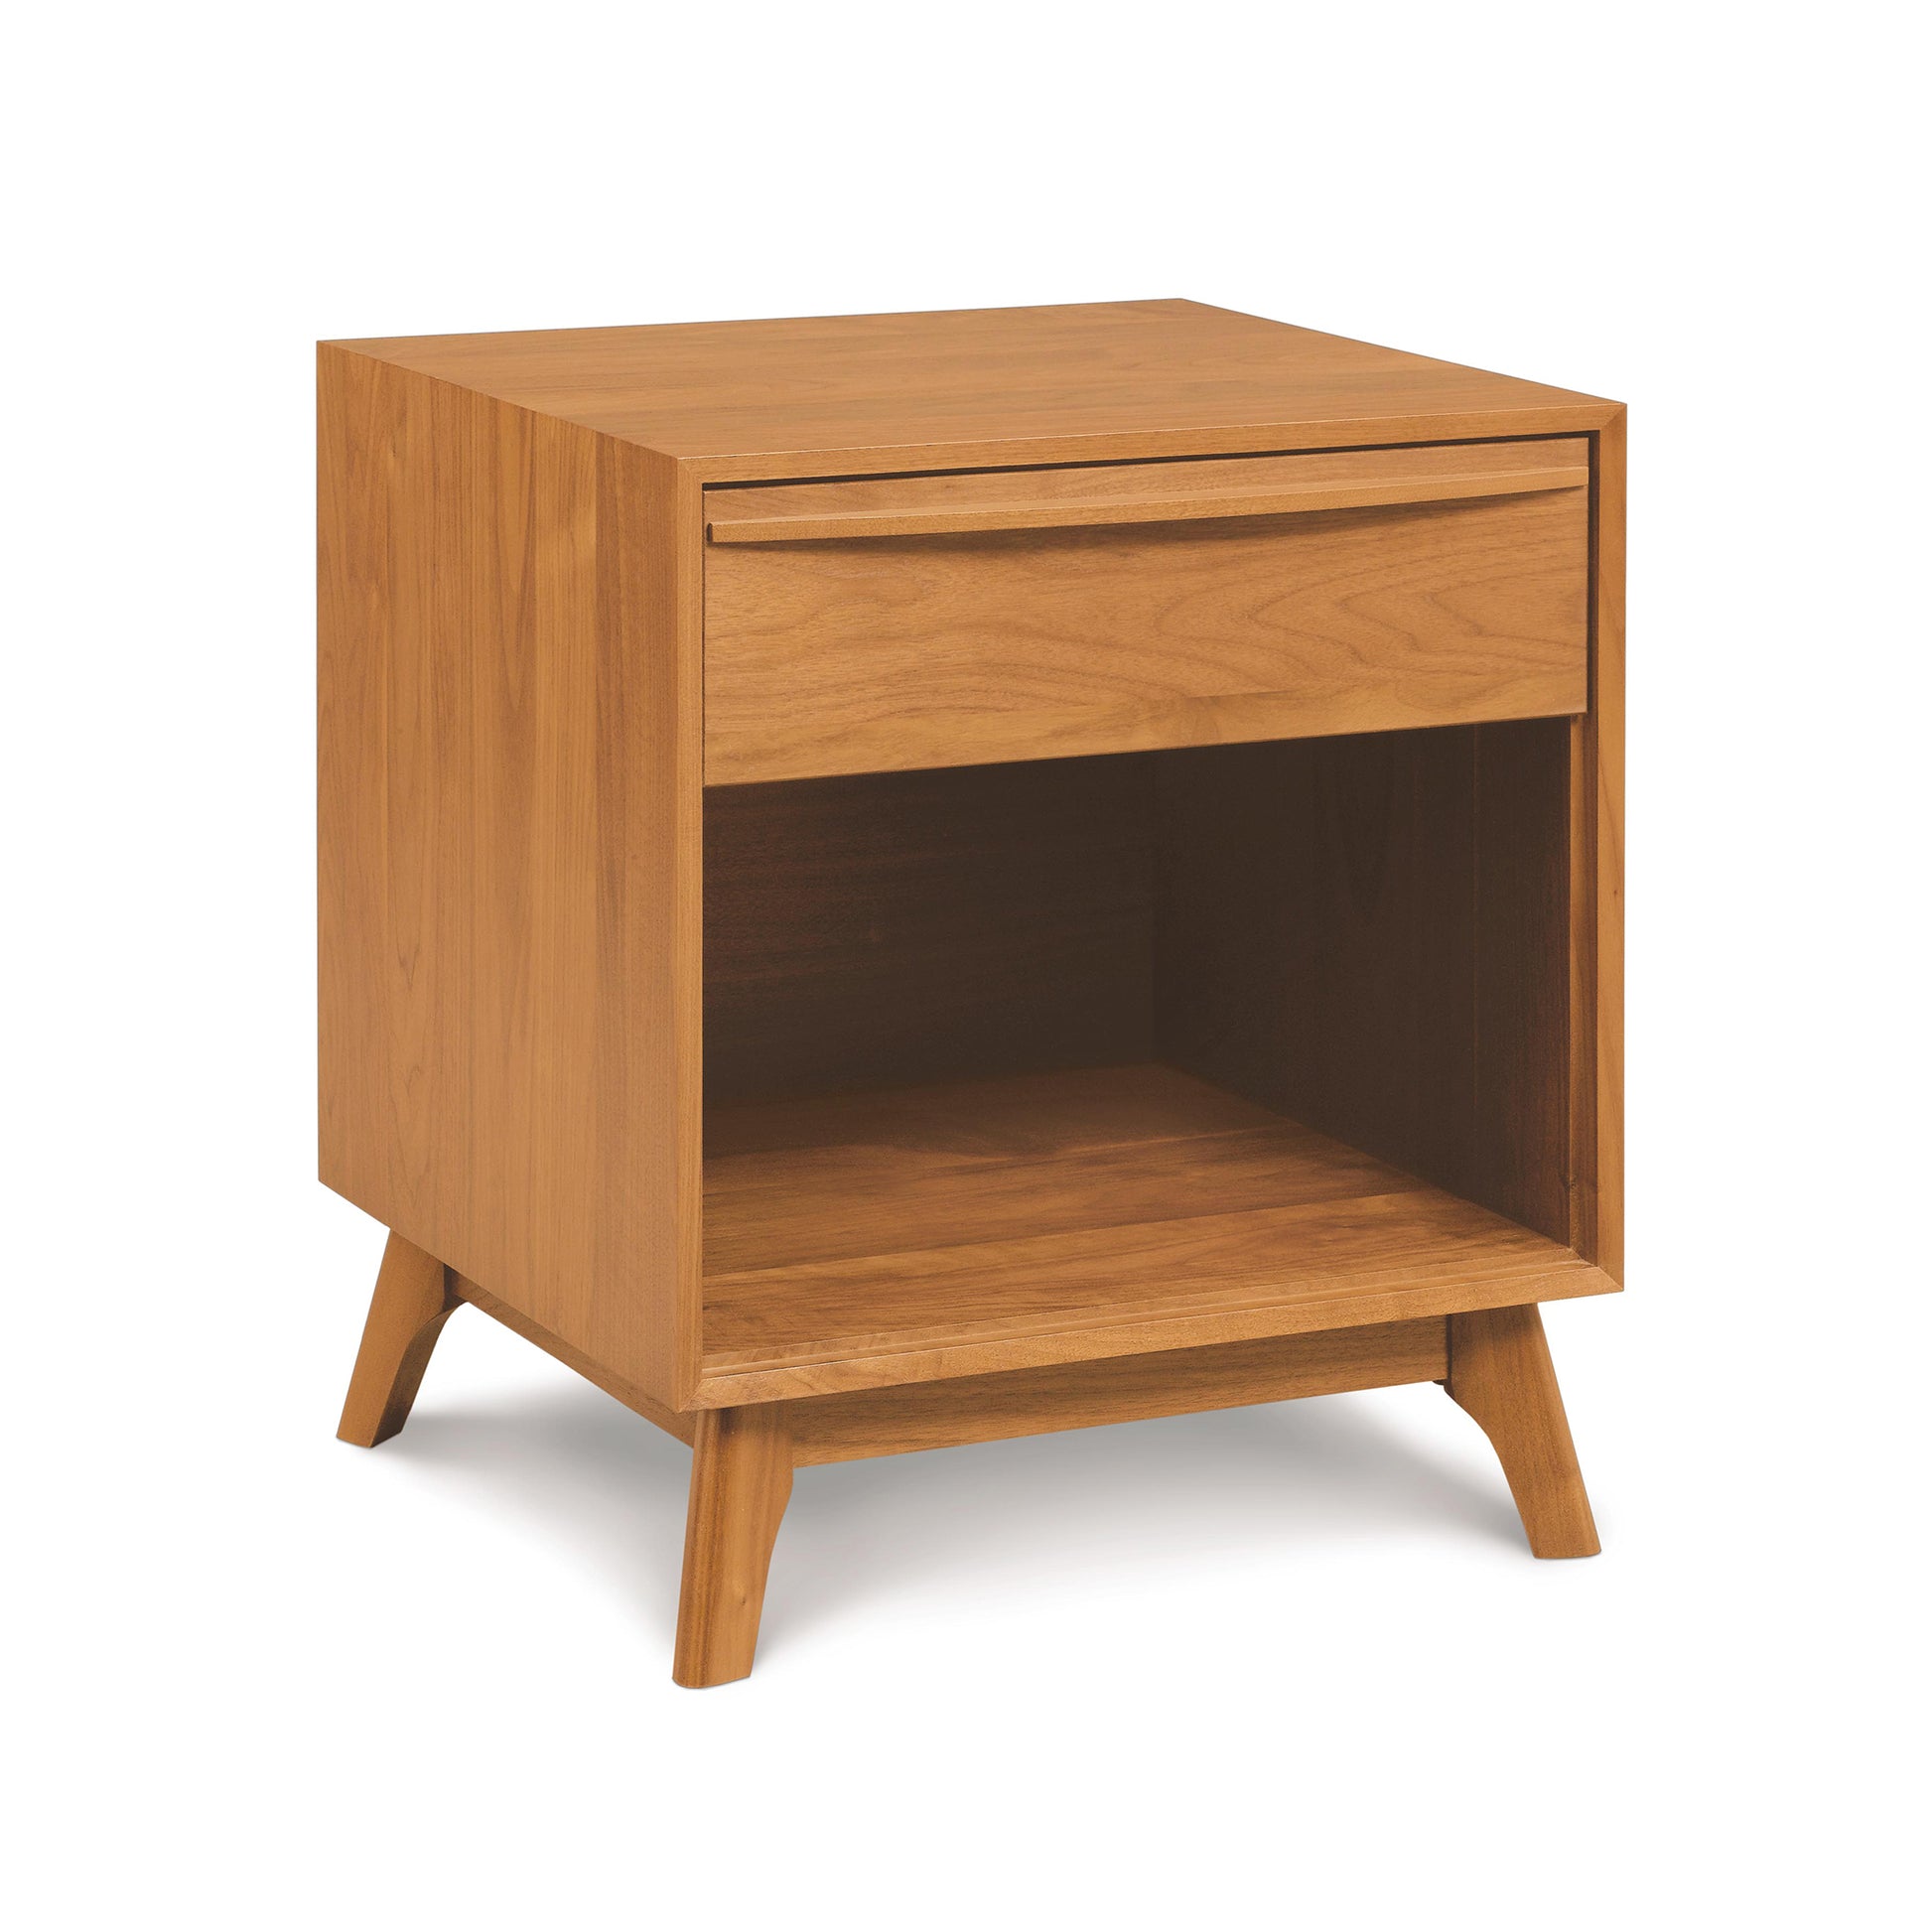 A solid wood Copeland Furniture Catalina 1-Drawer Enclosed Shelf Nightstand with one drawer and an open shelf on angled legs, isolated on a white background.